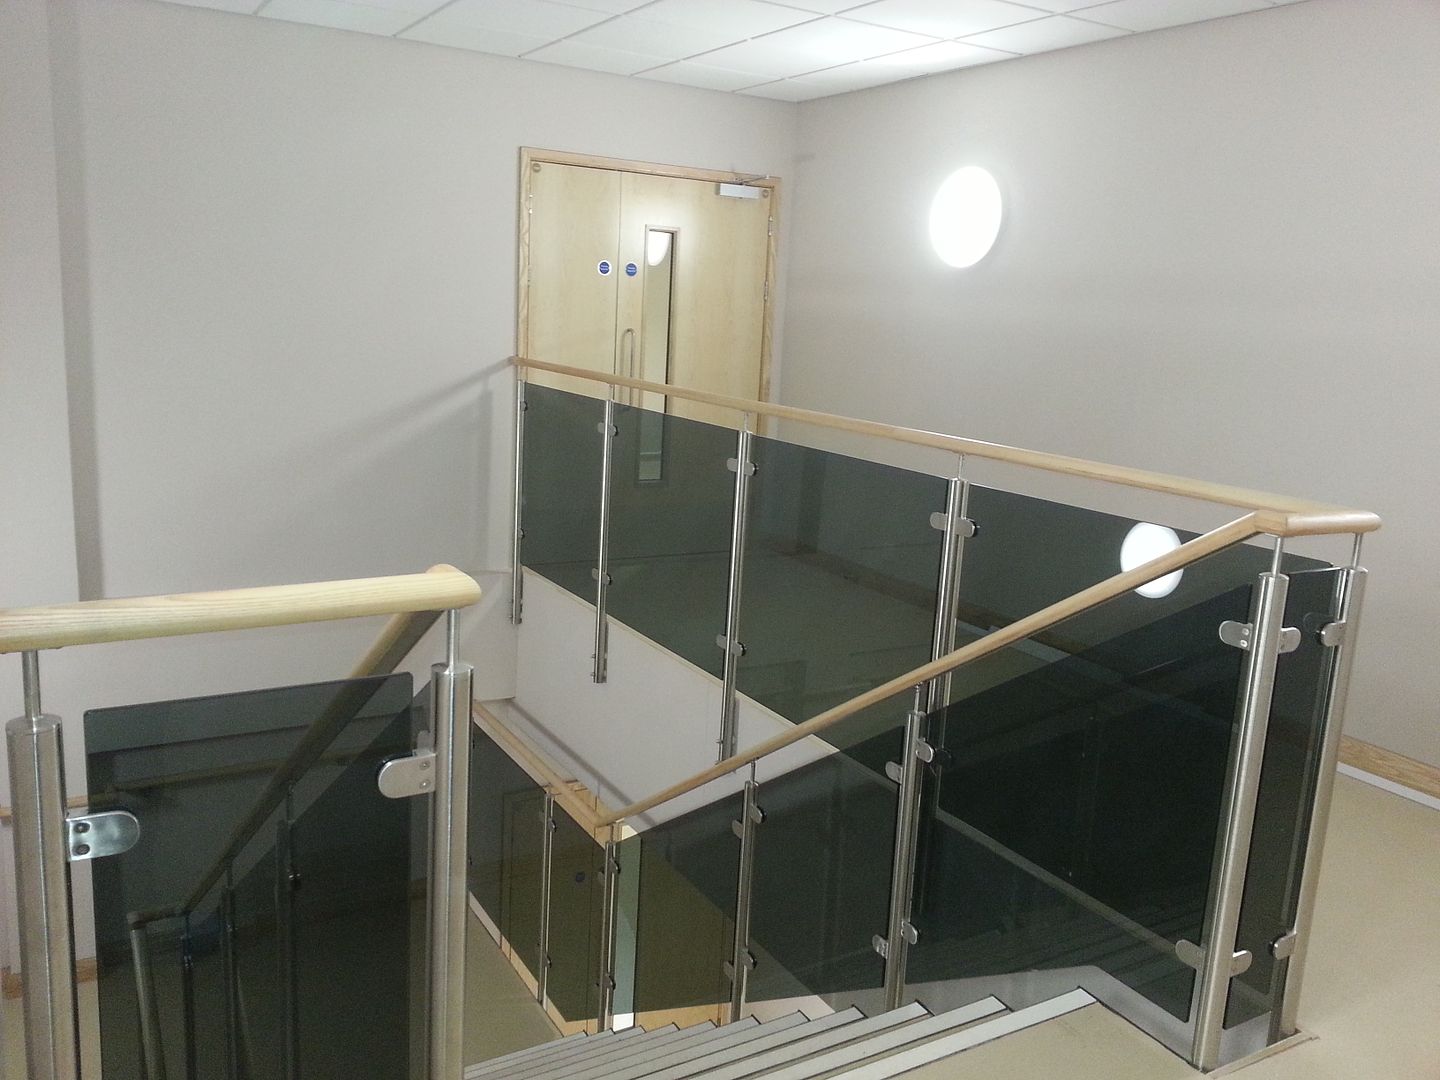 Glass balustrade leamington spa with timber handrail online uk installed